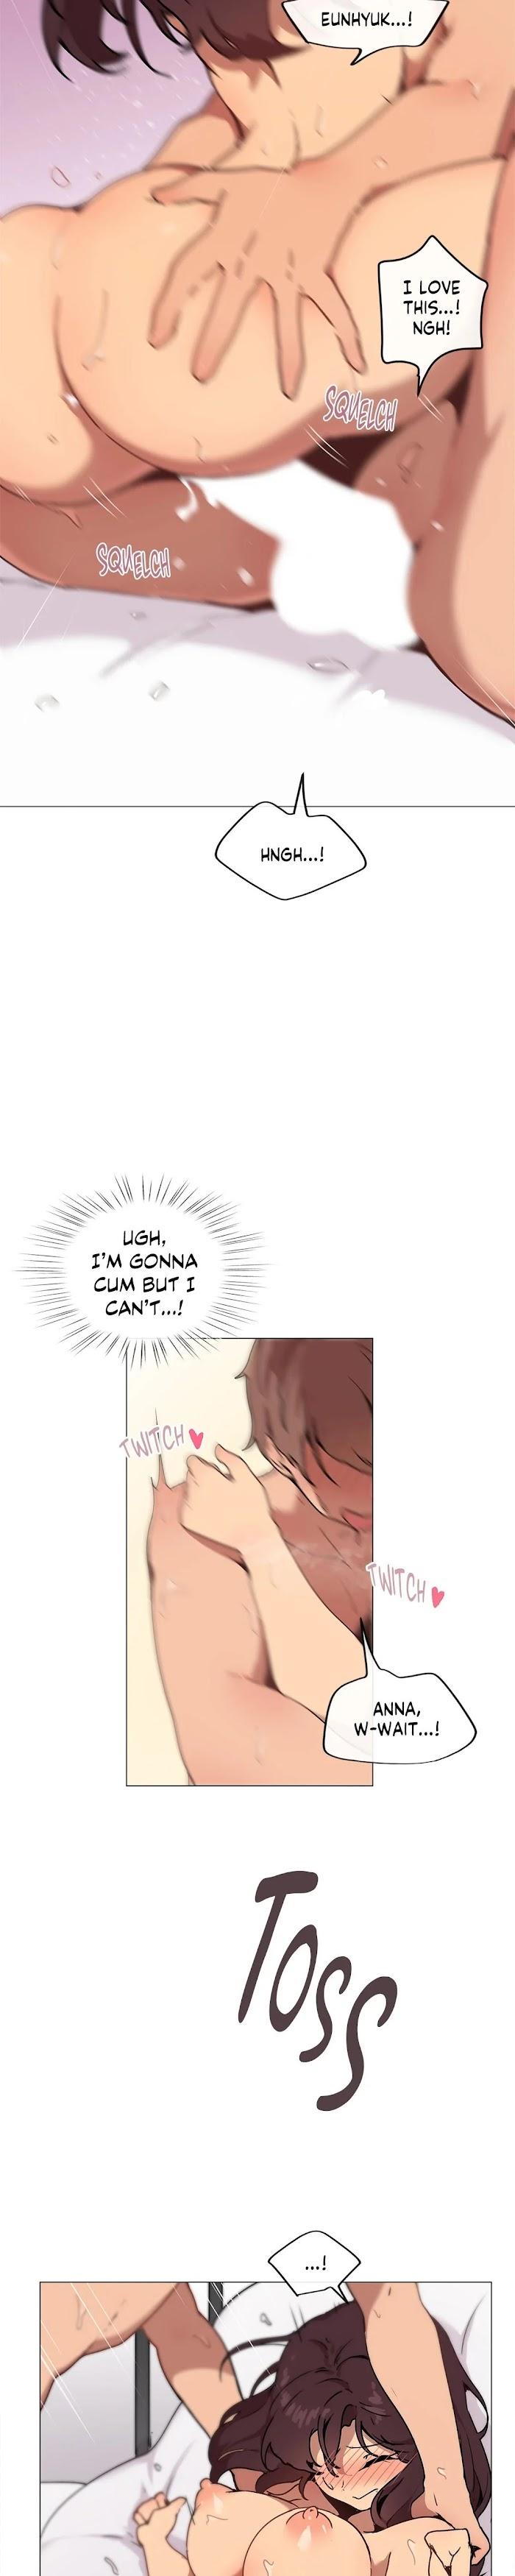 [Dumangoon, 130F] Sexcape Room: Wipe Out Ch.9/9 [English] [Manhwa PDF] Completed 165